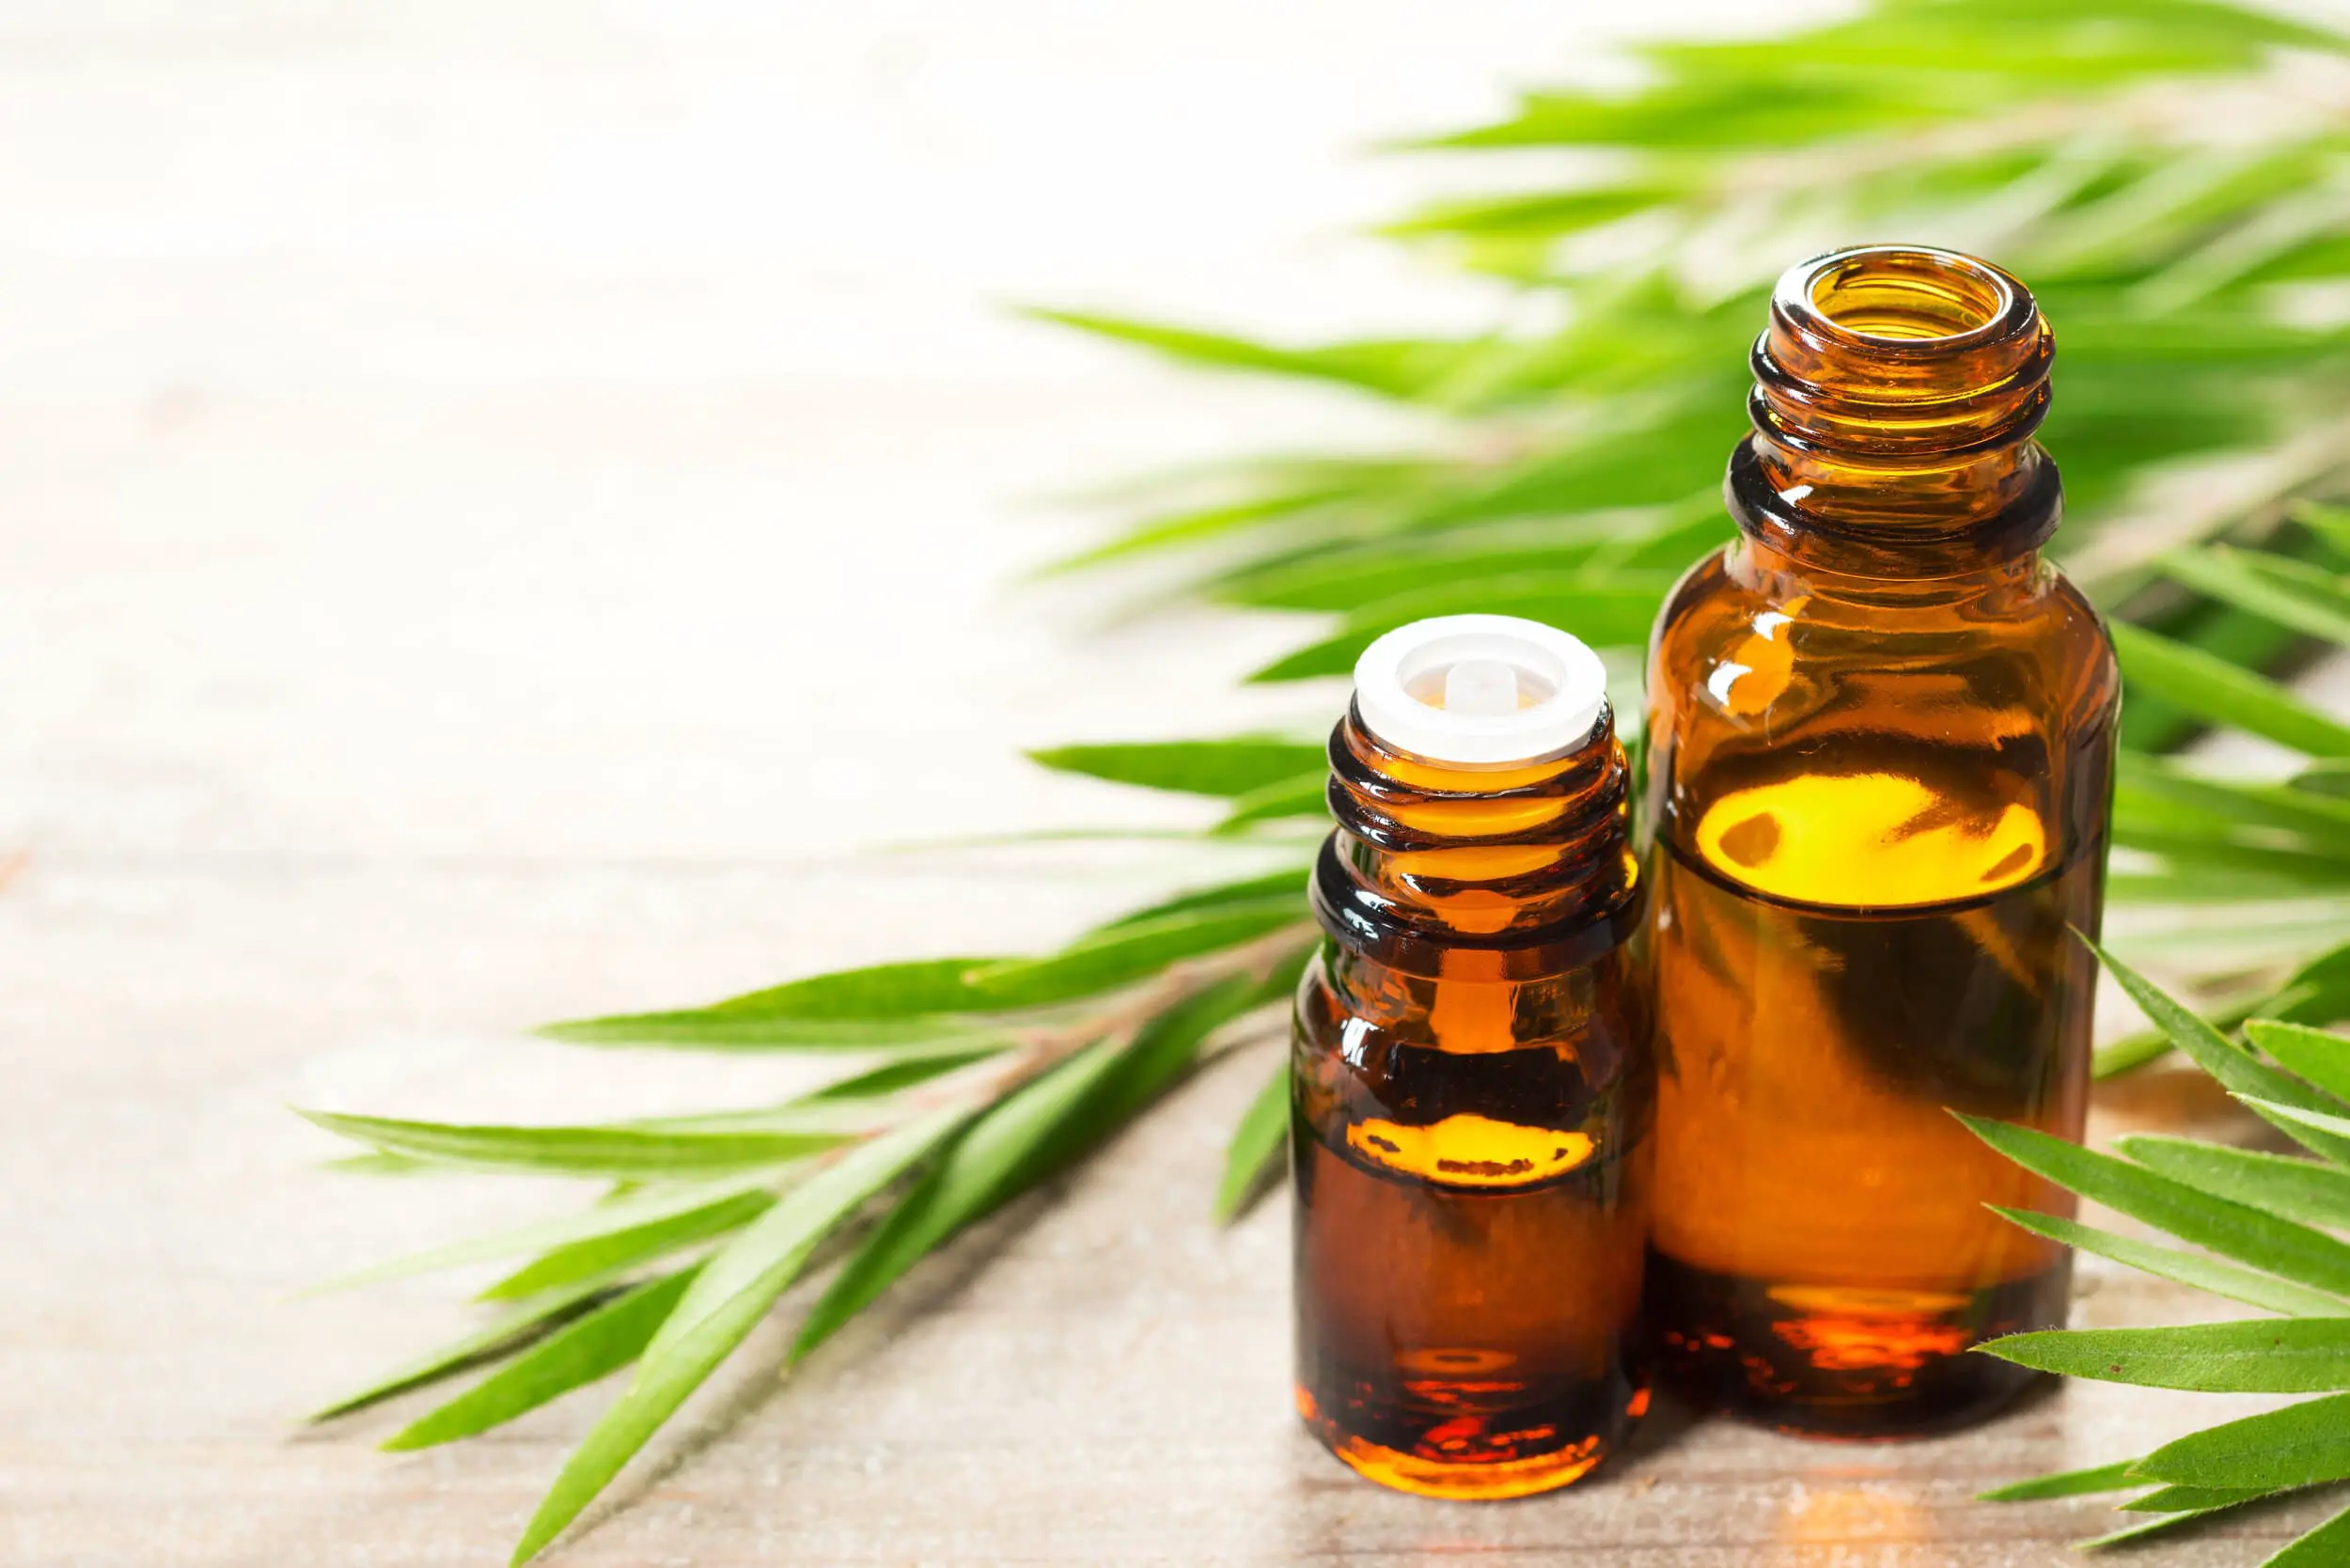 Is Tea Tree Oil Safe For Dogs? Find out now